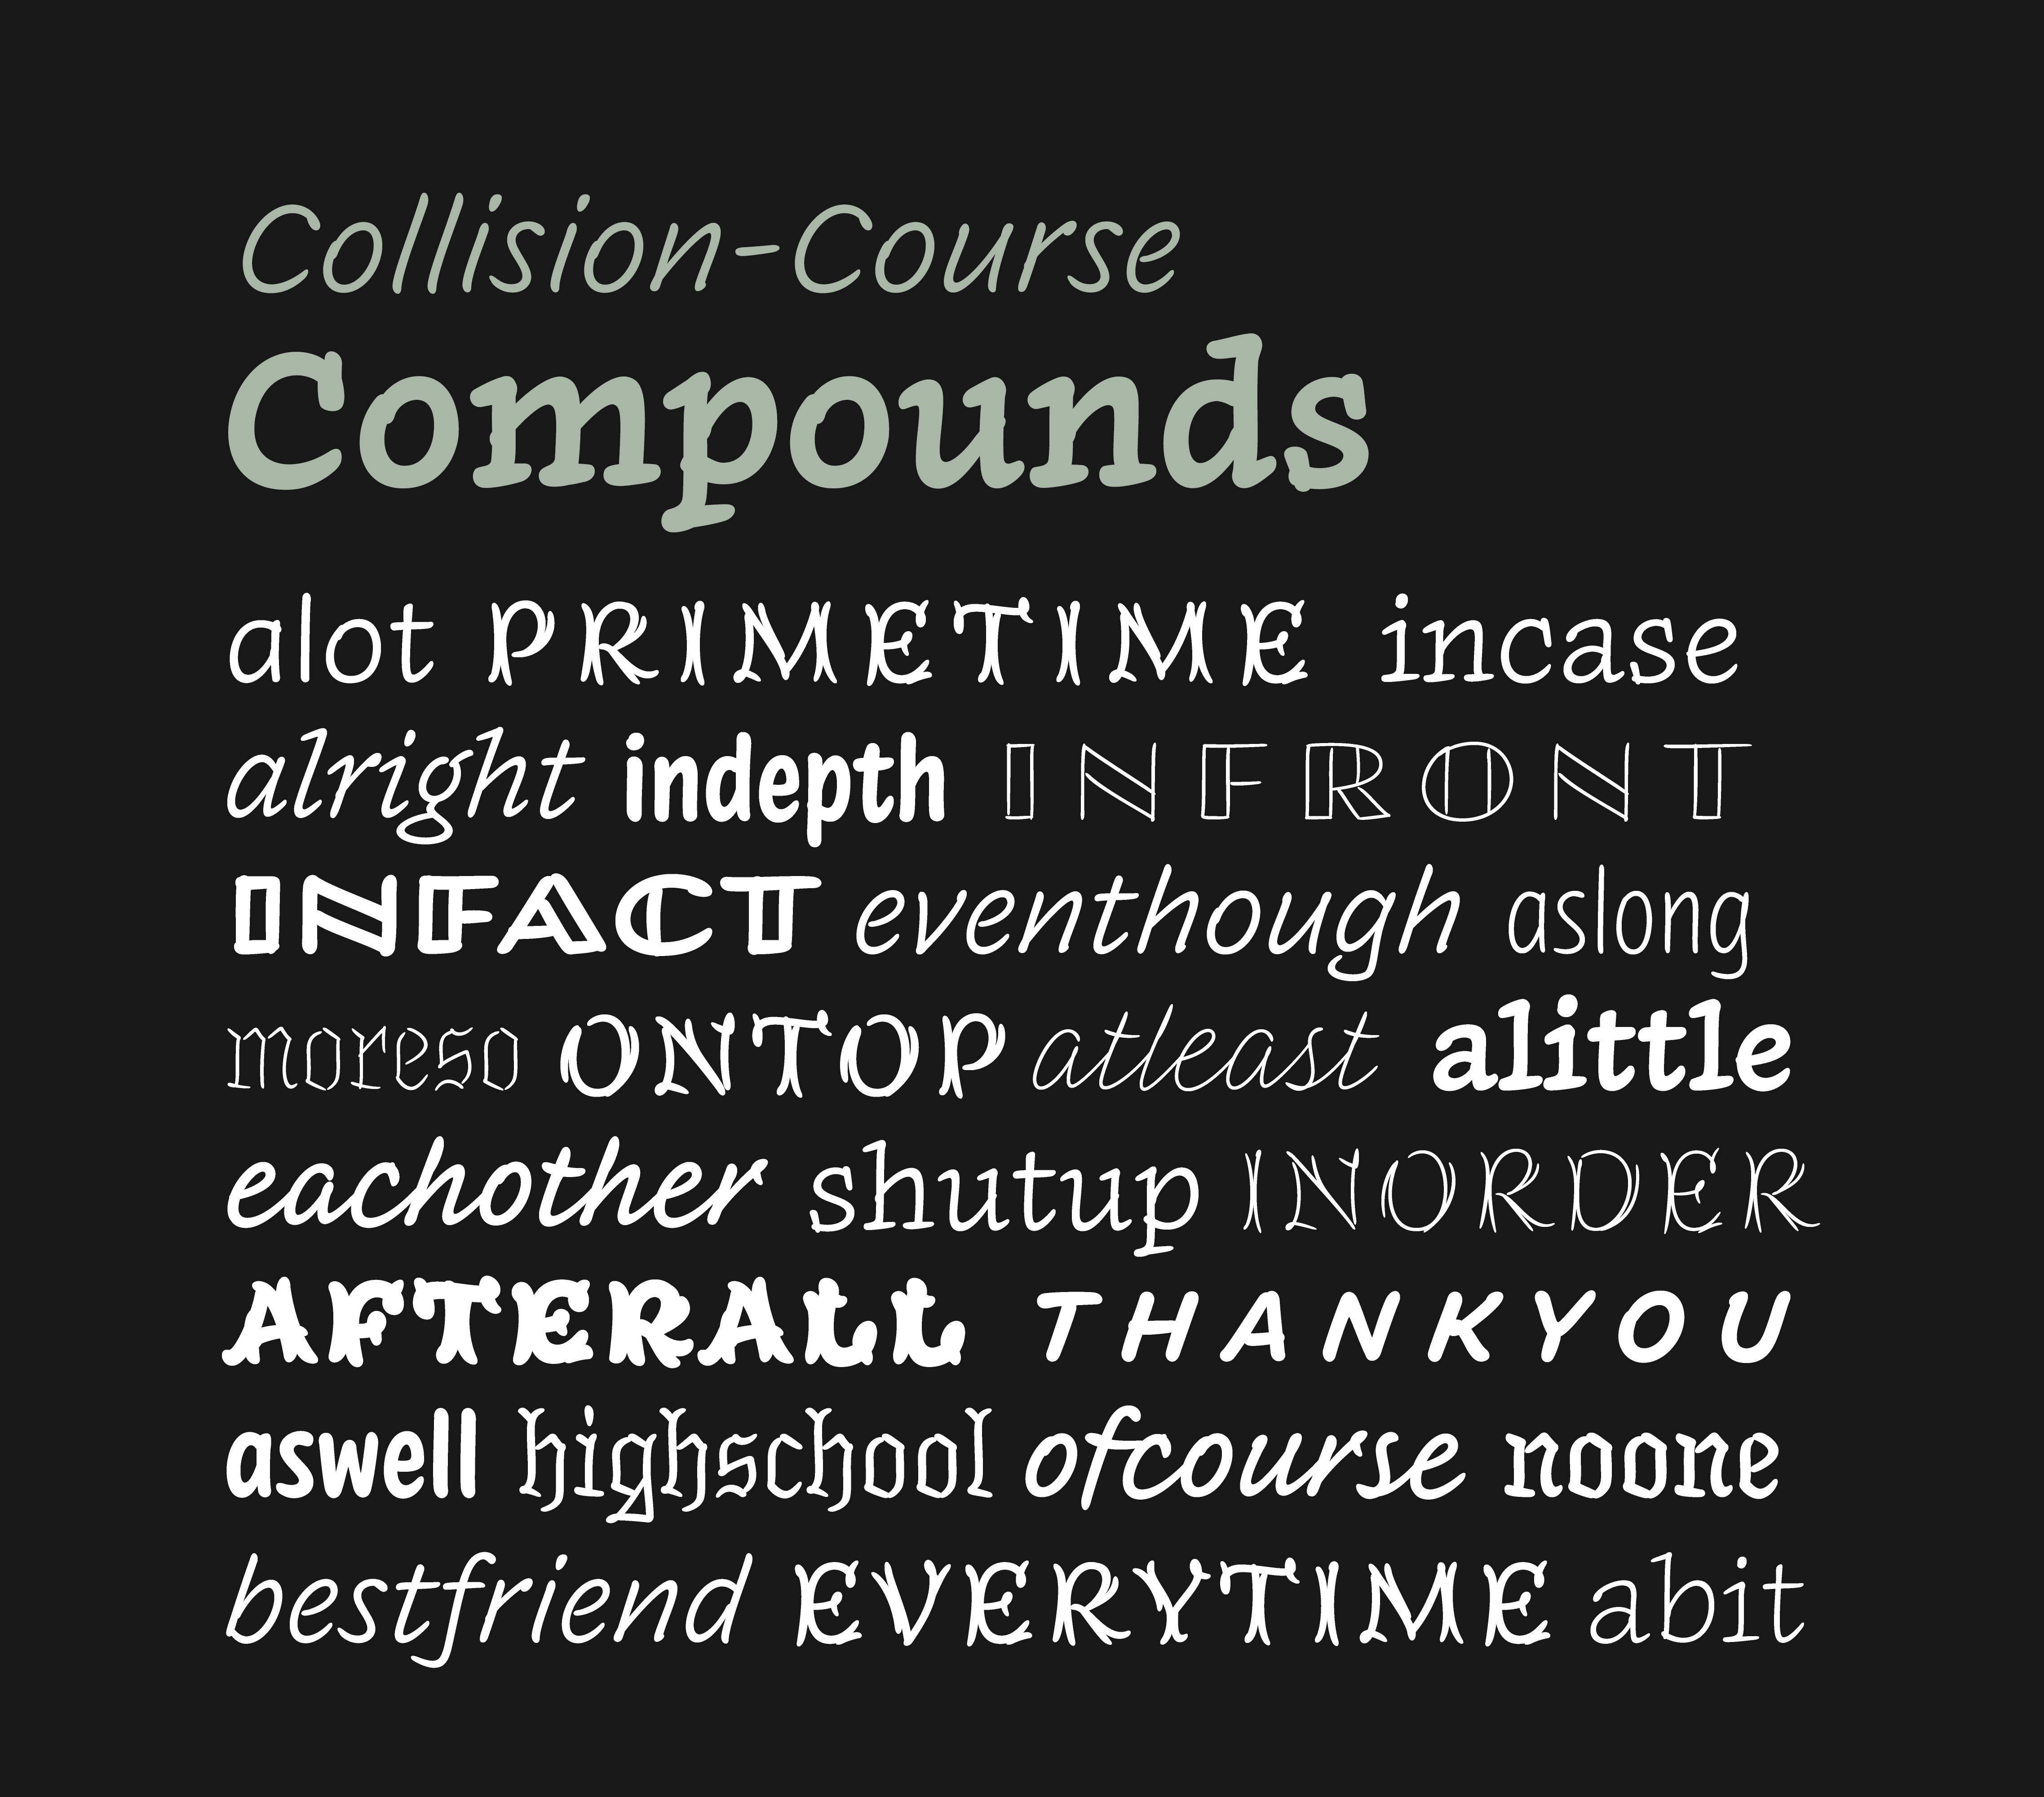 A graphic listing several collision-course compounds, including "alot," "primetime," "indepth," and "eachother." 